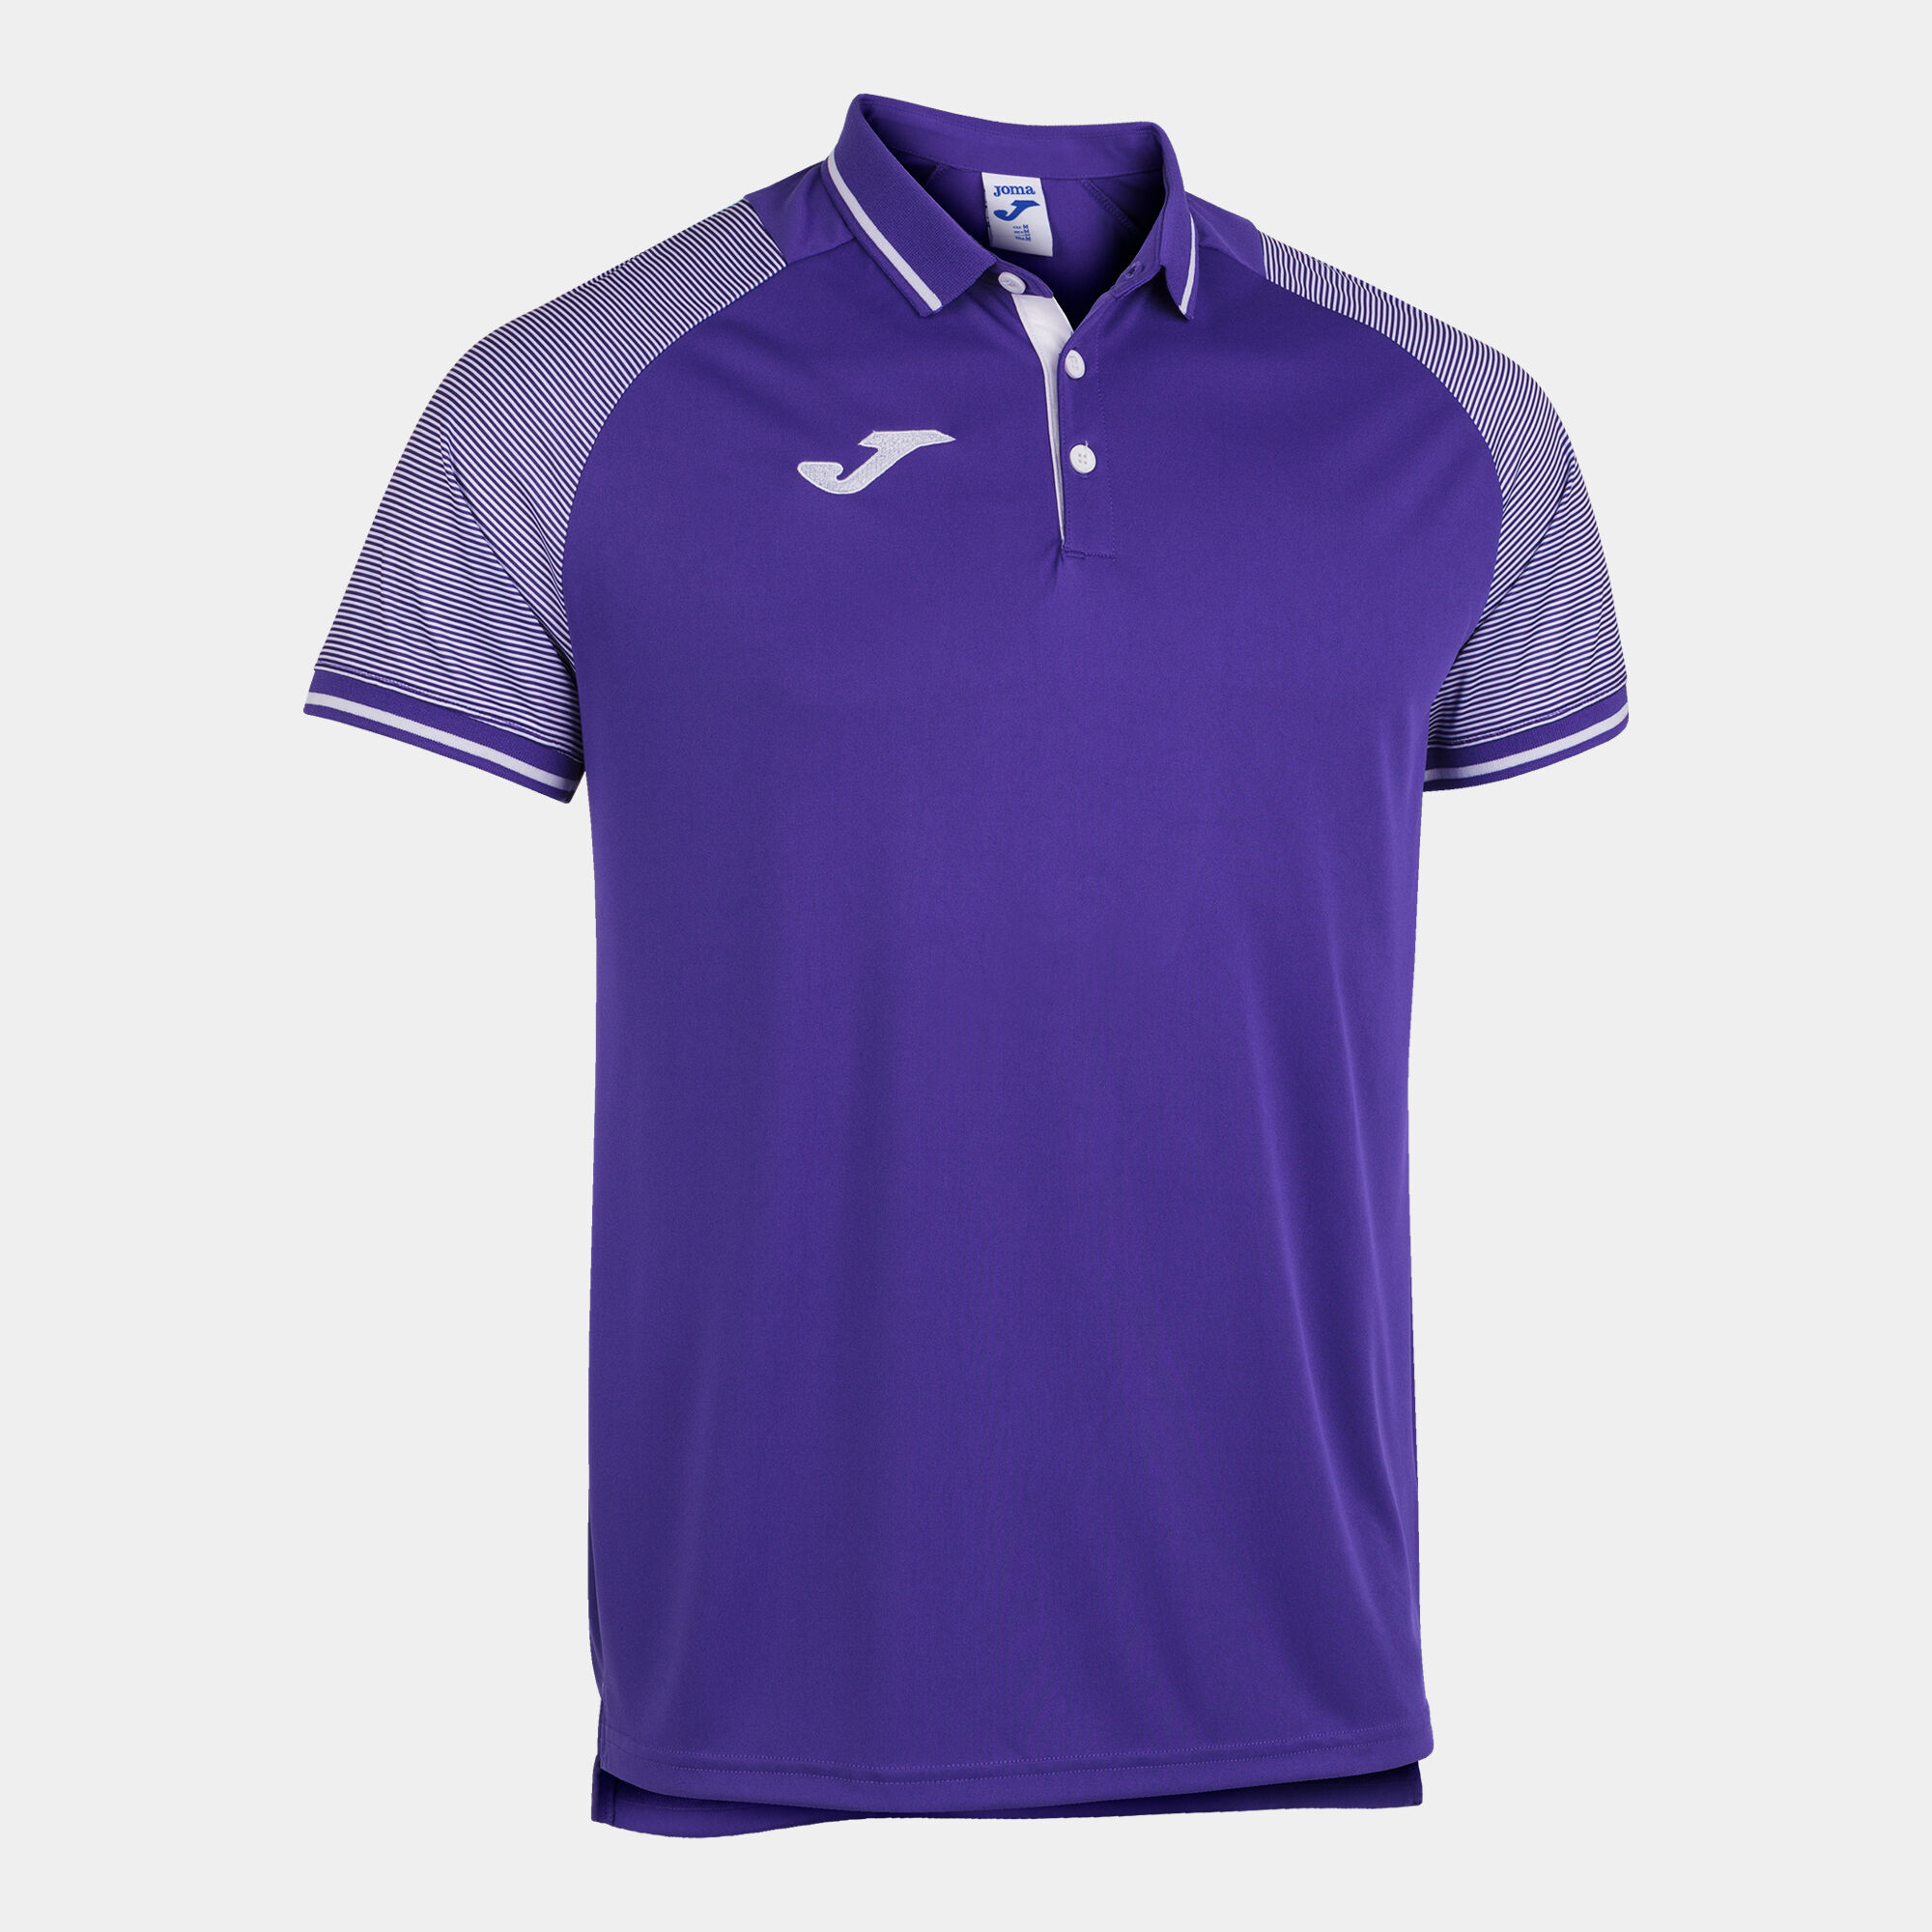 POLO MANCHES COURTES HOMME ESSENTIAL II VIOLET BLANC